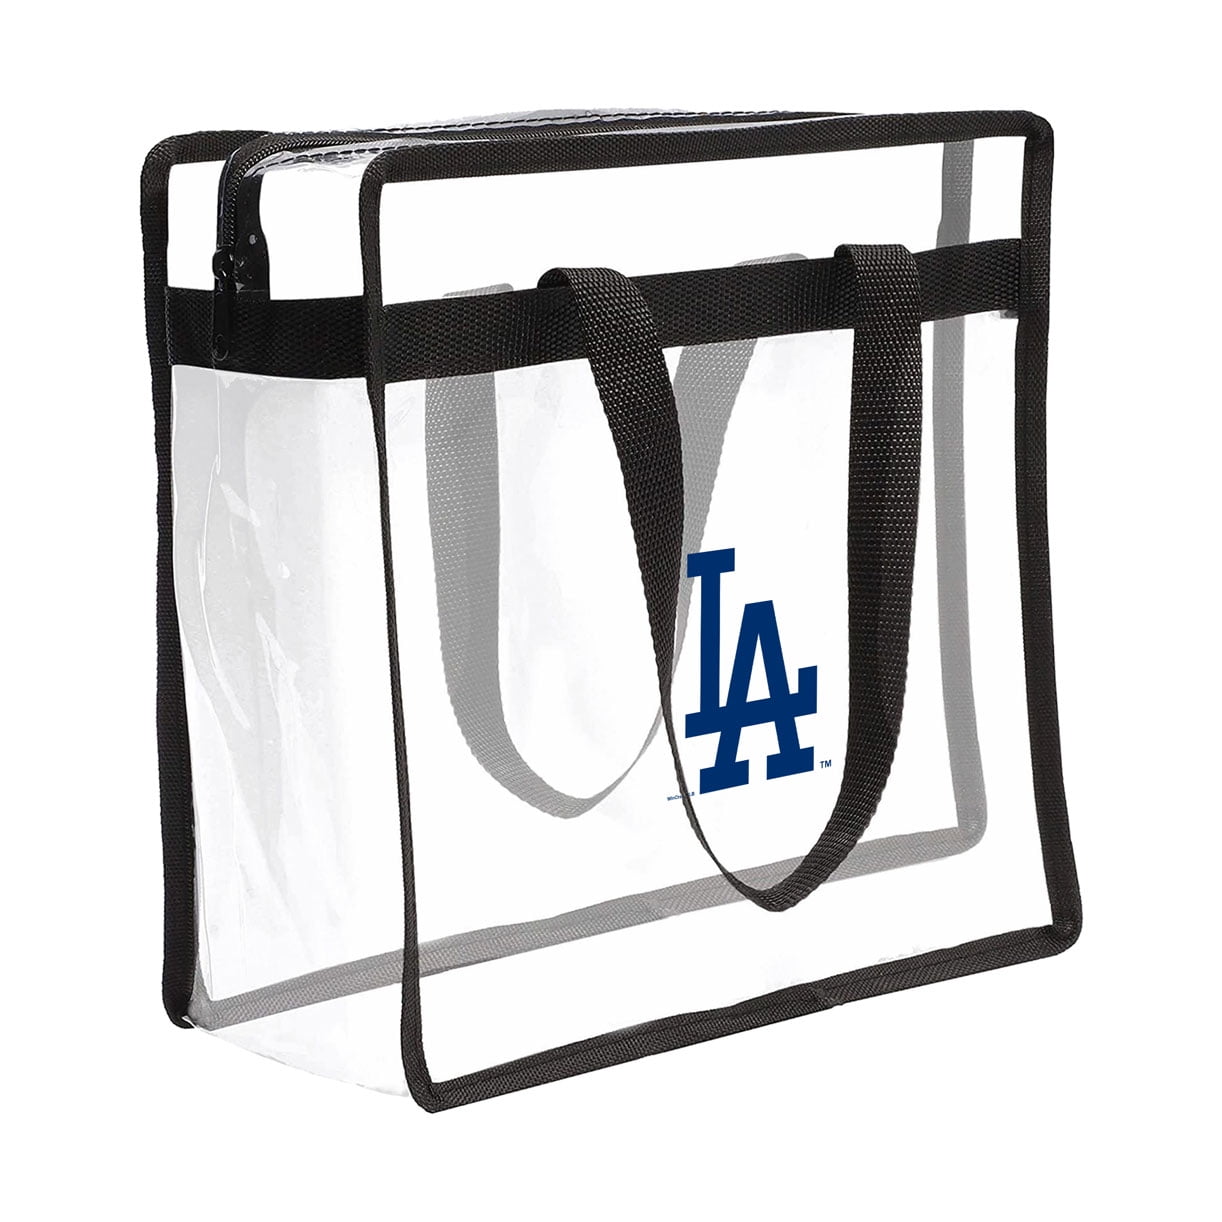 Dodger Stadium Clear Tote Bag / Dodgers / Customize to Any 